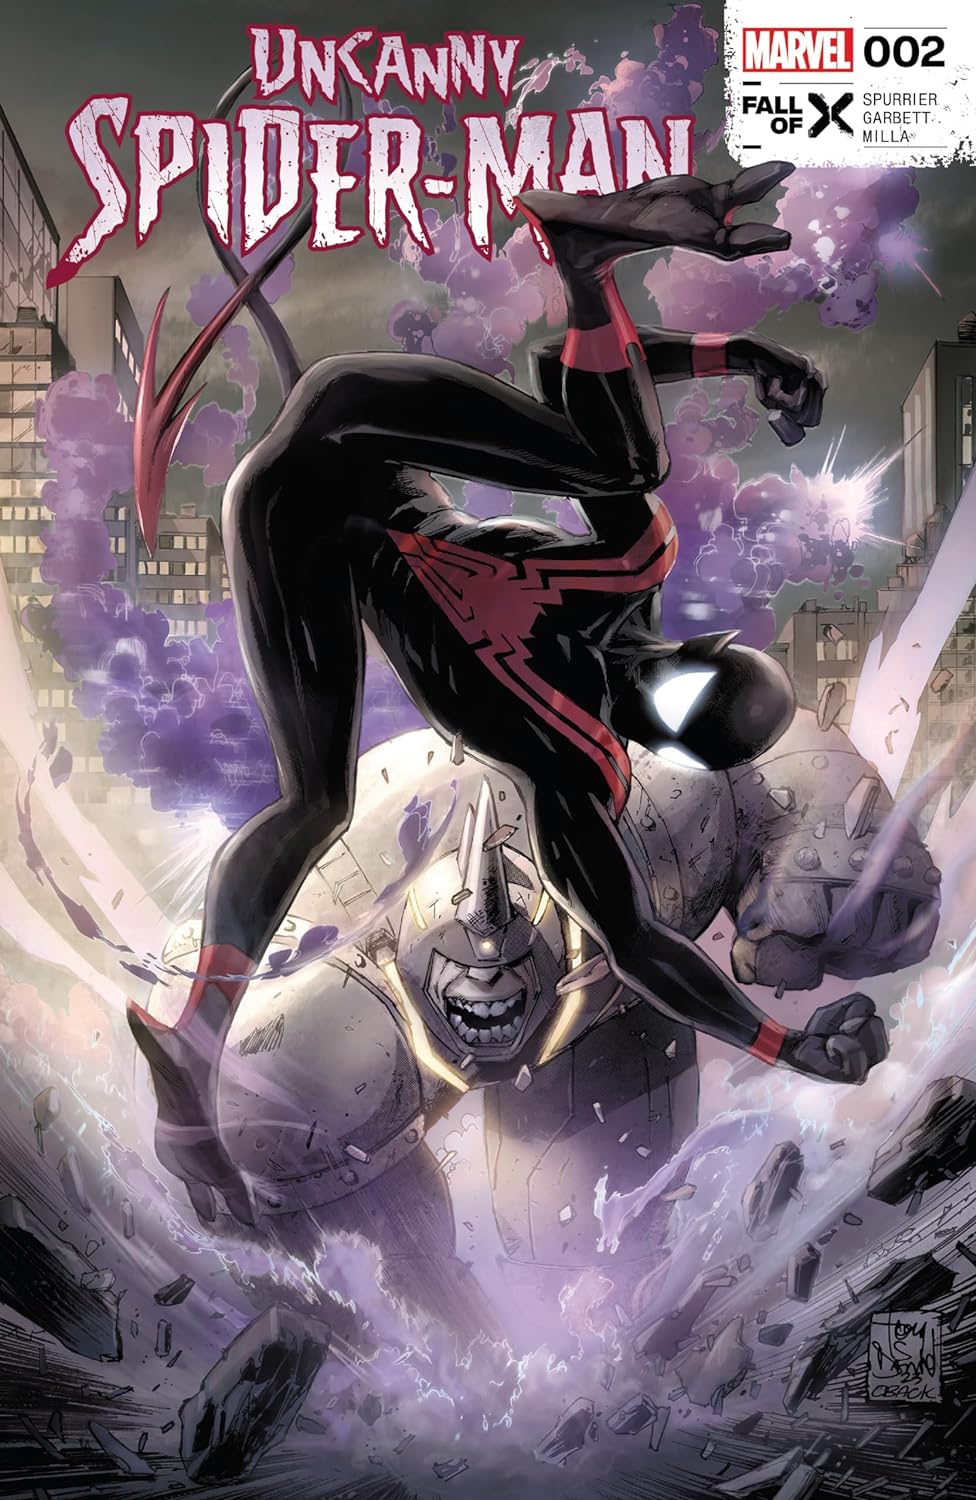 Uncanny Spider-Man #2 (Fall of the X-Men)